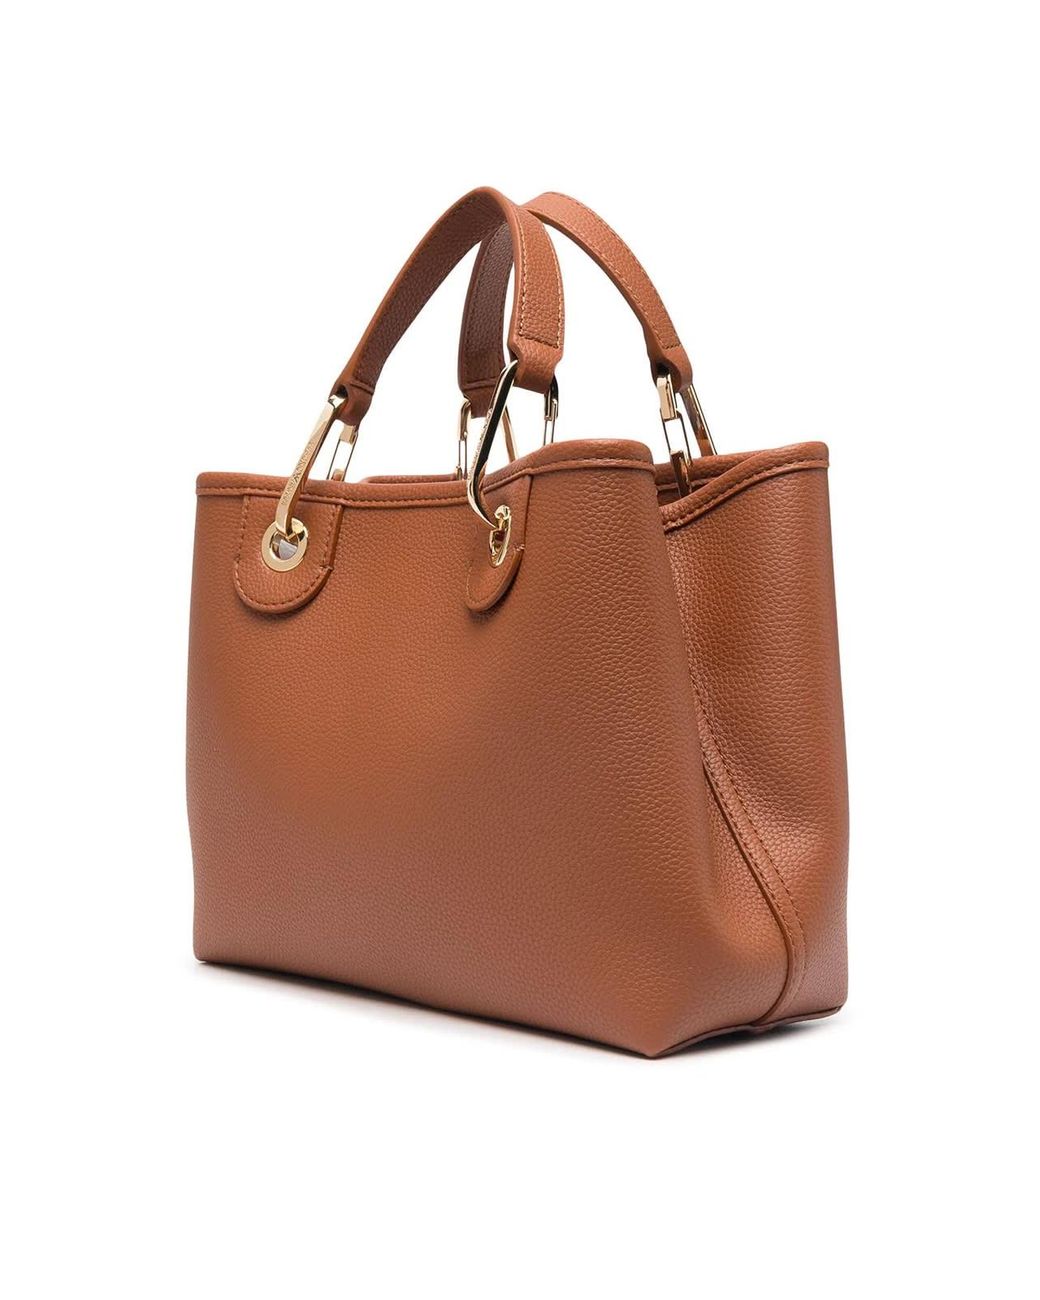 Emporio Armani Shopping Bag in Brown | Lyst